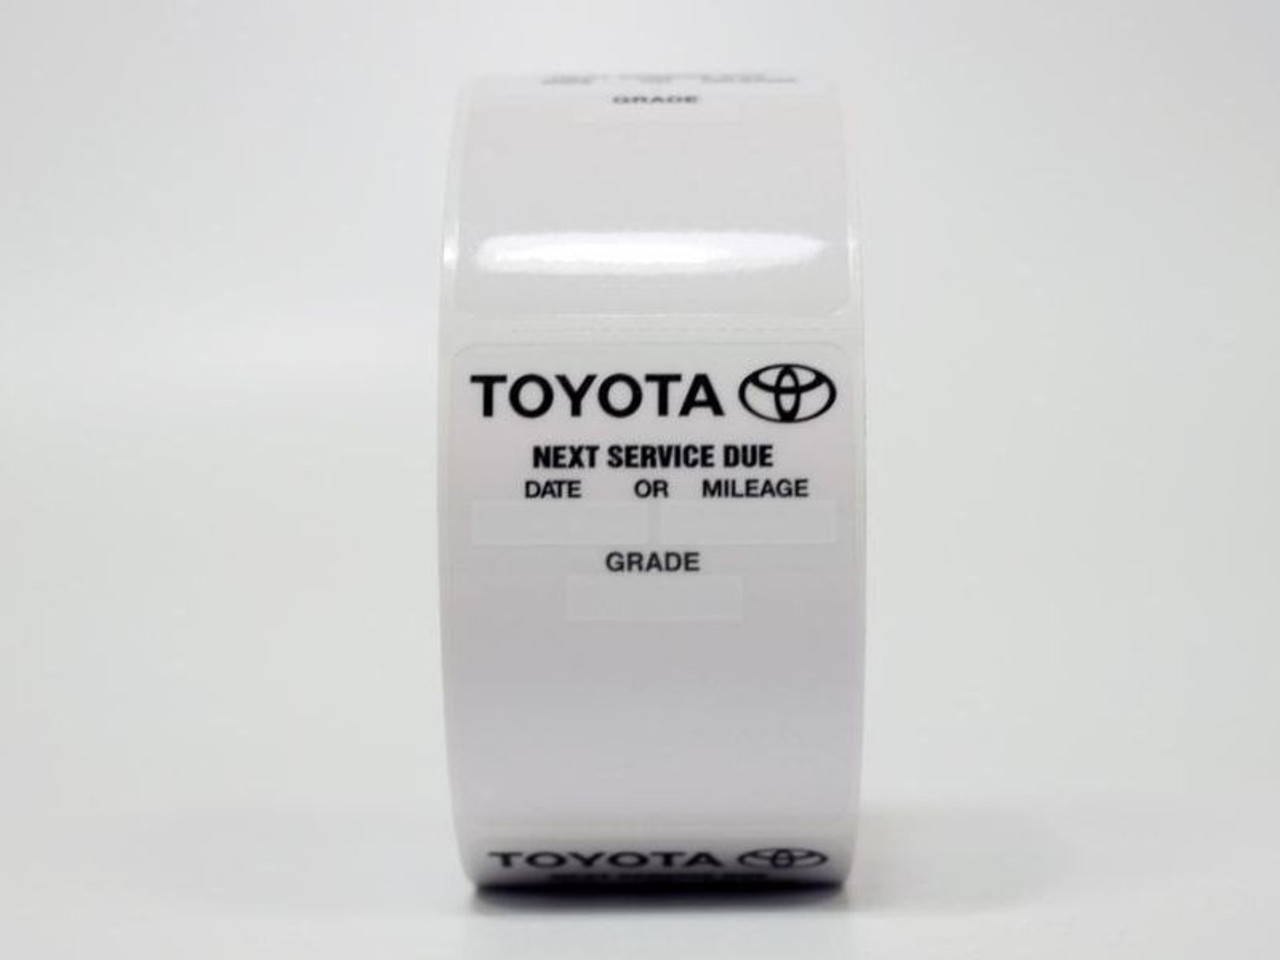 Toyota Oil Change Sticker - Works with a printer!